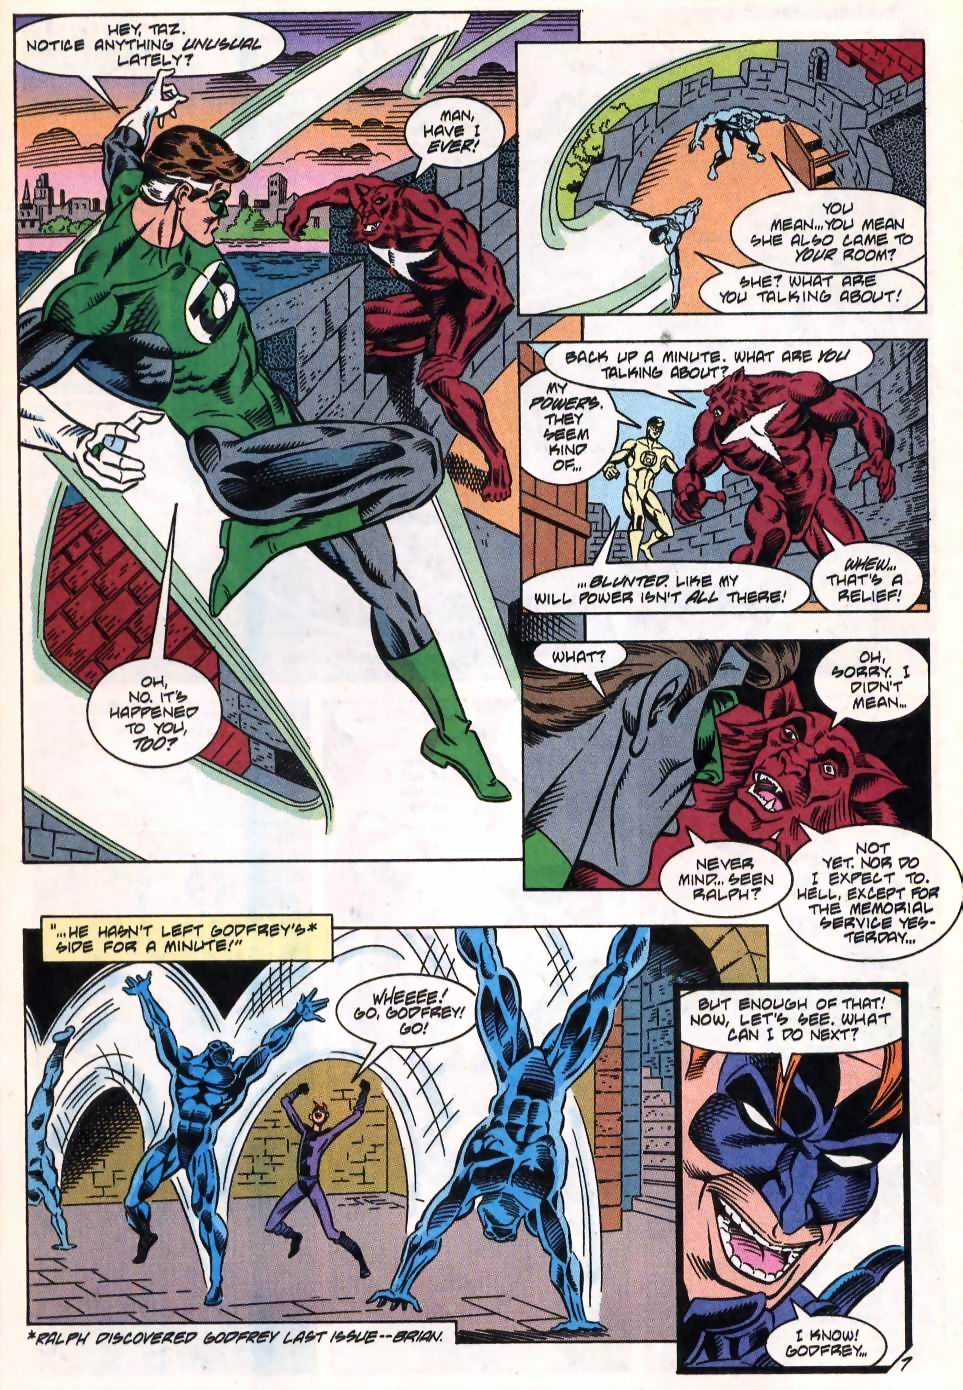 Justice League International (1993) 54 Page 7